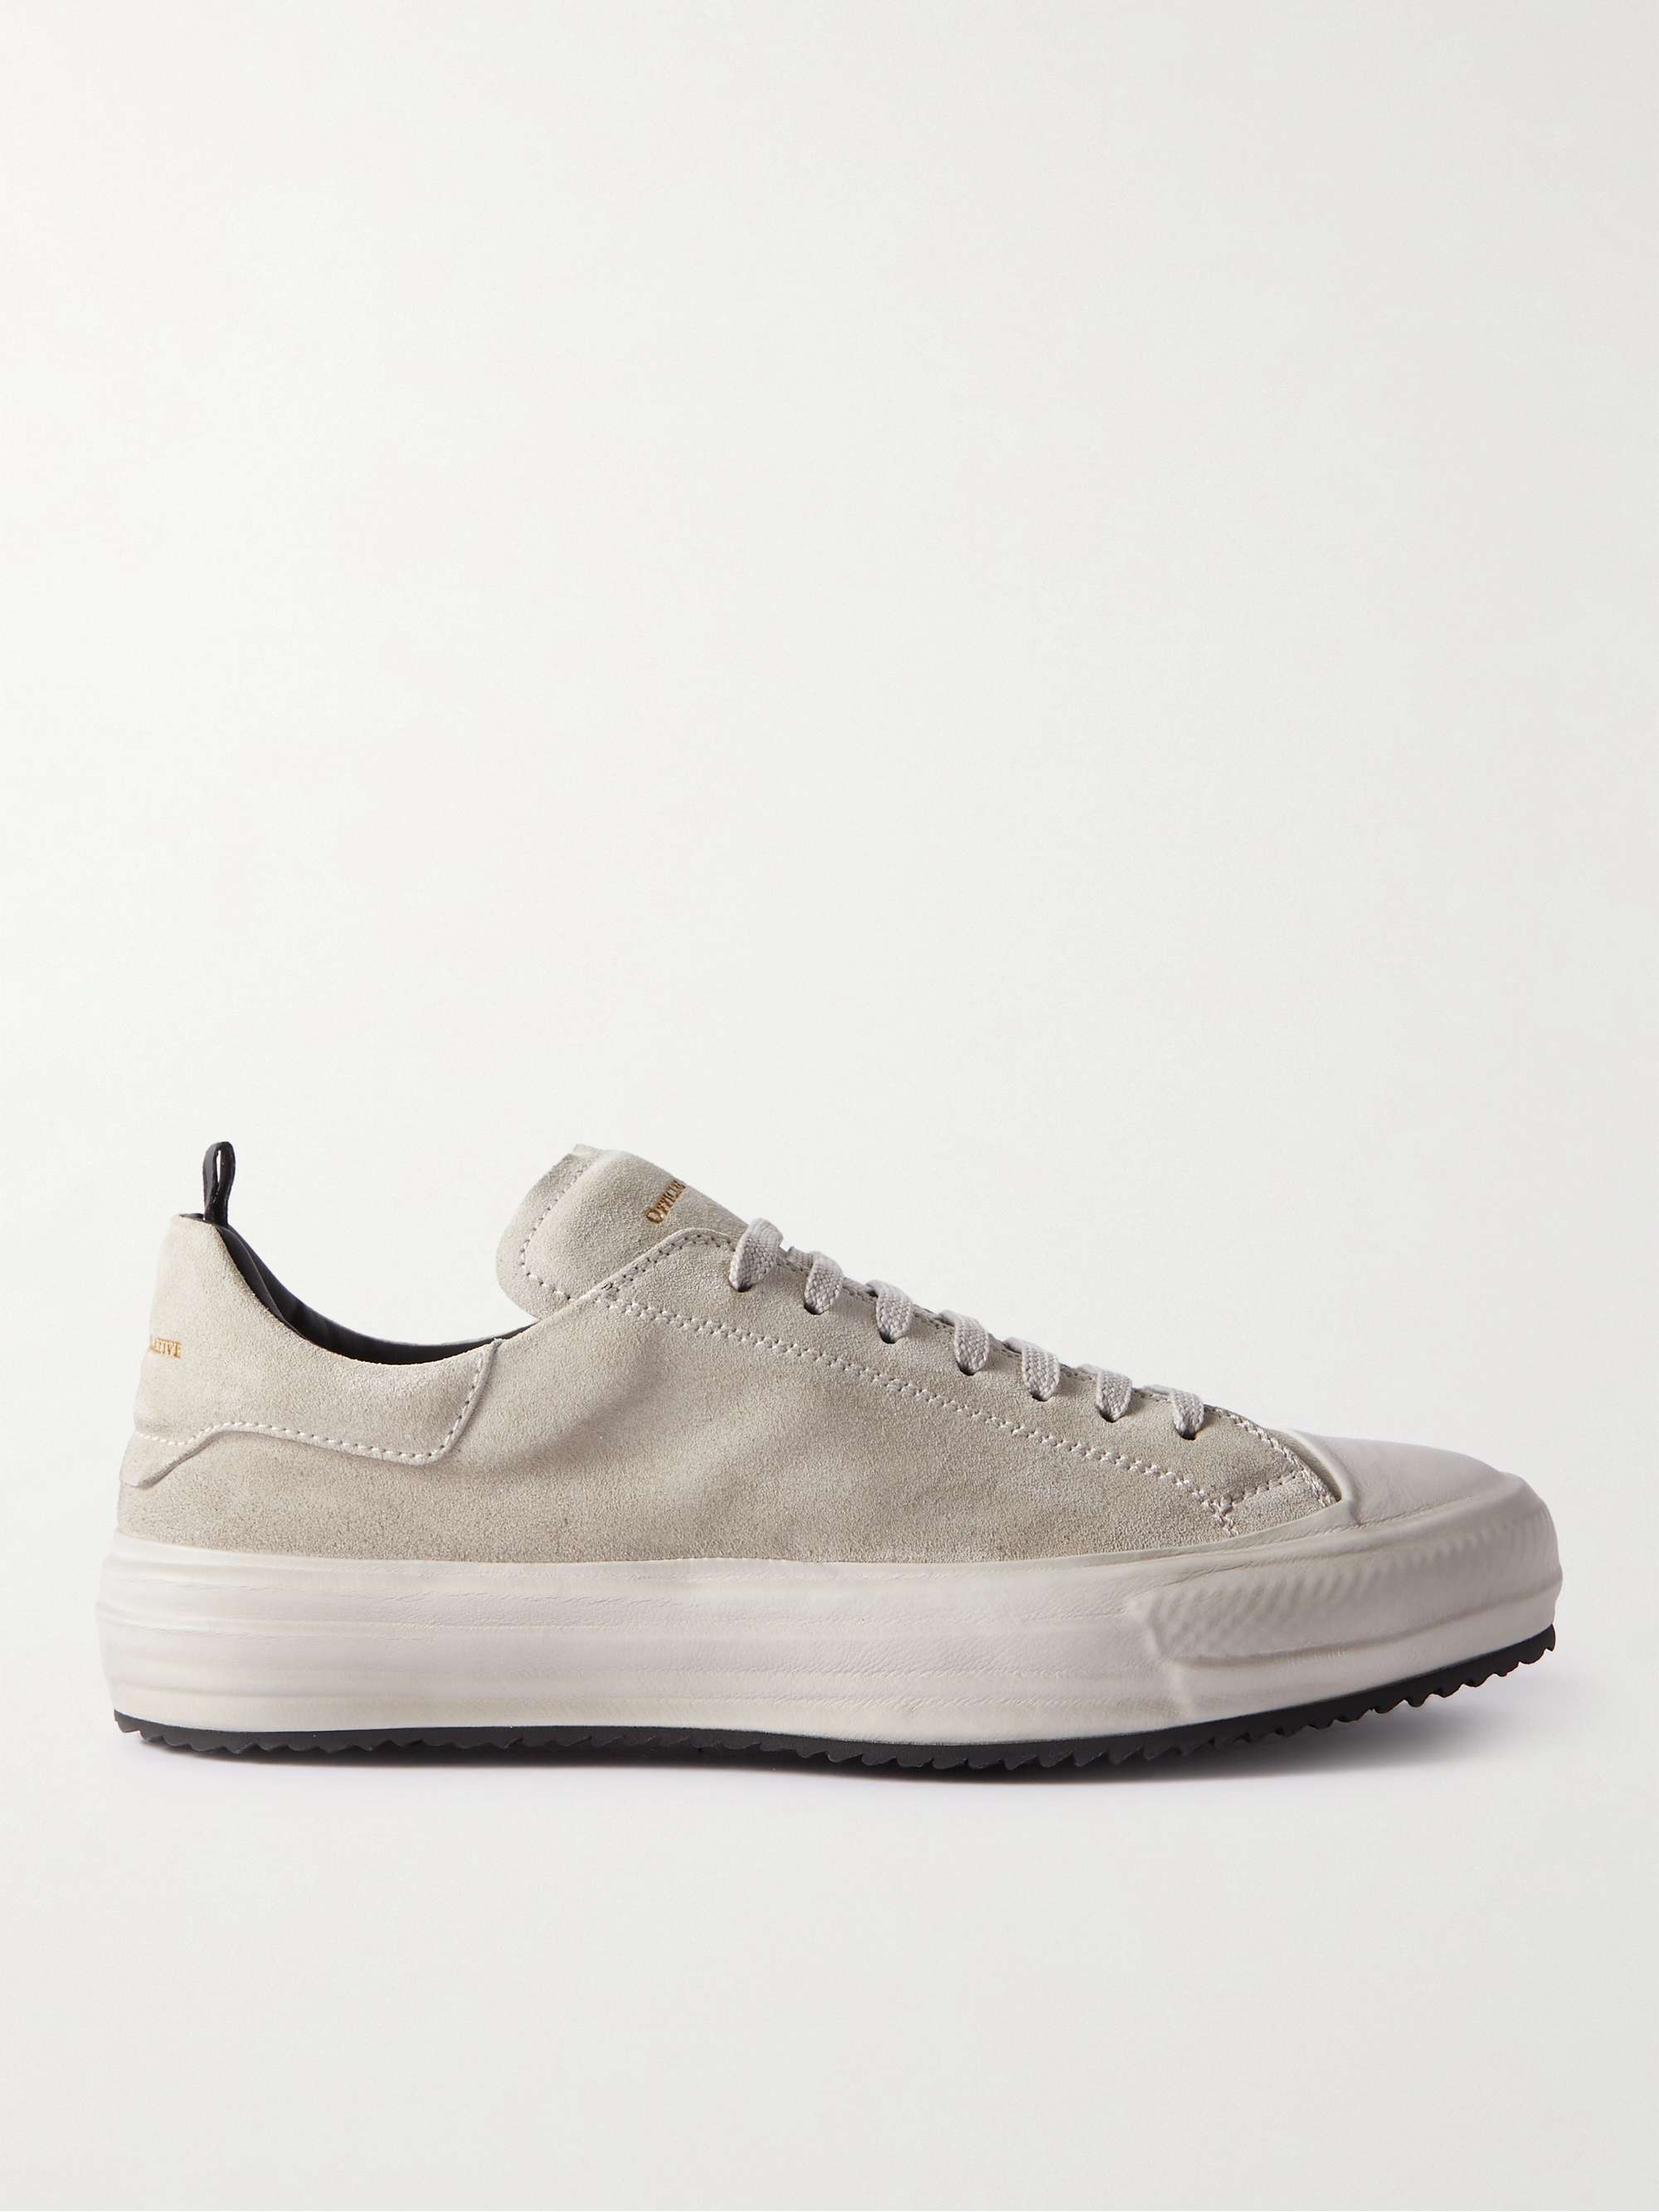 OFFICINE CREATIVE Mes Suede Sneakers